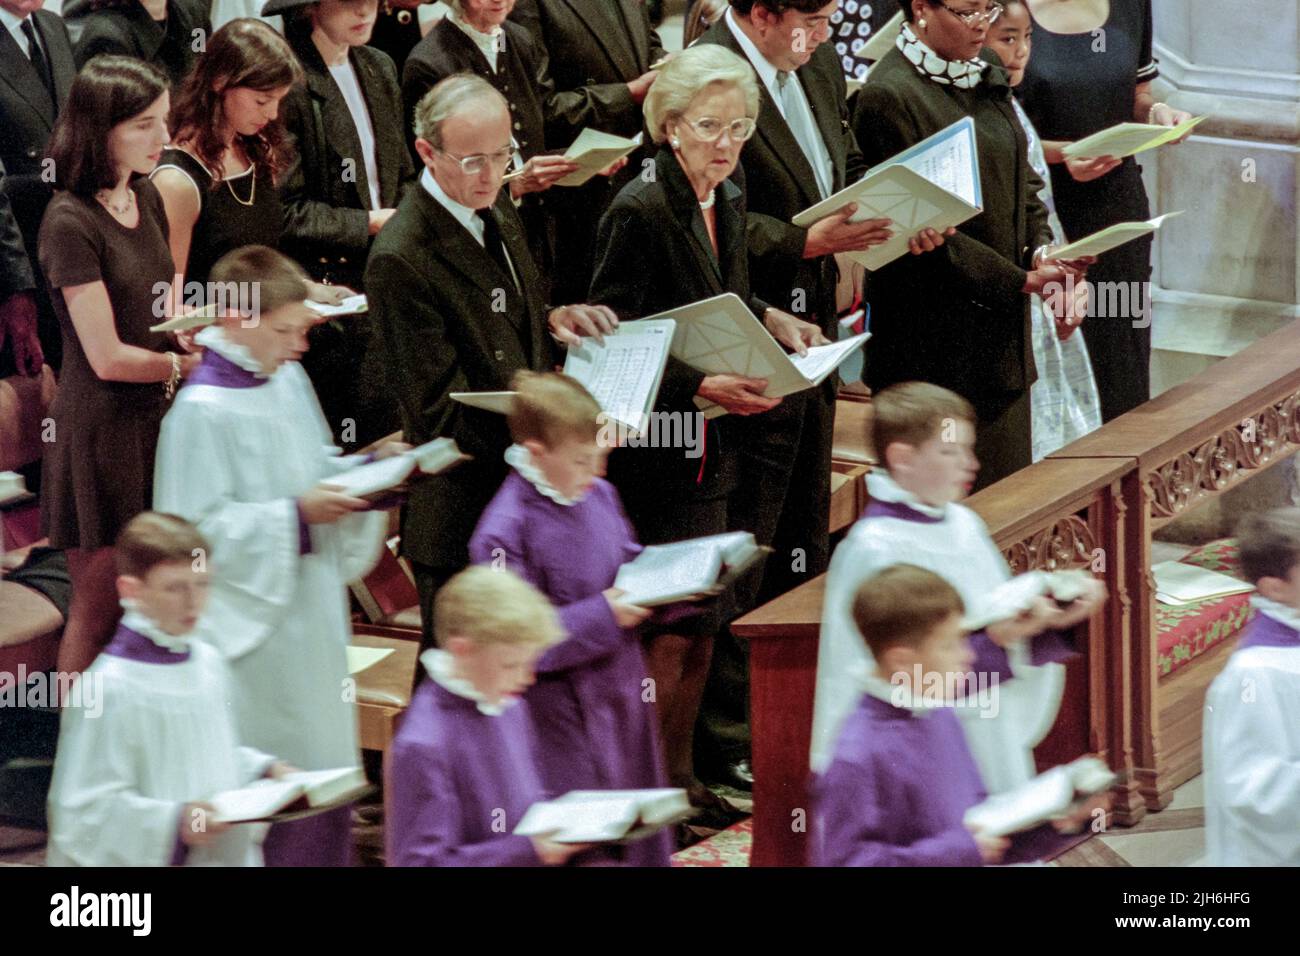 British Ambassador to the U.S. Sir John Kerr, left, joins other guests in singing a hymn during a memorial and prayer service to Diana, the Princess of Wales, on the occasion of her death at the Washington National Cathedral, September 6, 1997, in Washington, D.C. Standing next to Kerr are Chairwoman of the Washington Post Katharine Graham and U.S. ambassador to the United Nations Bill Richardson. Stock Photo